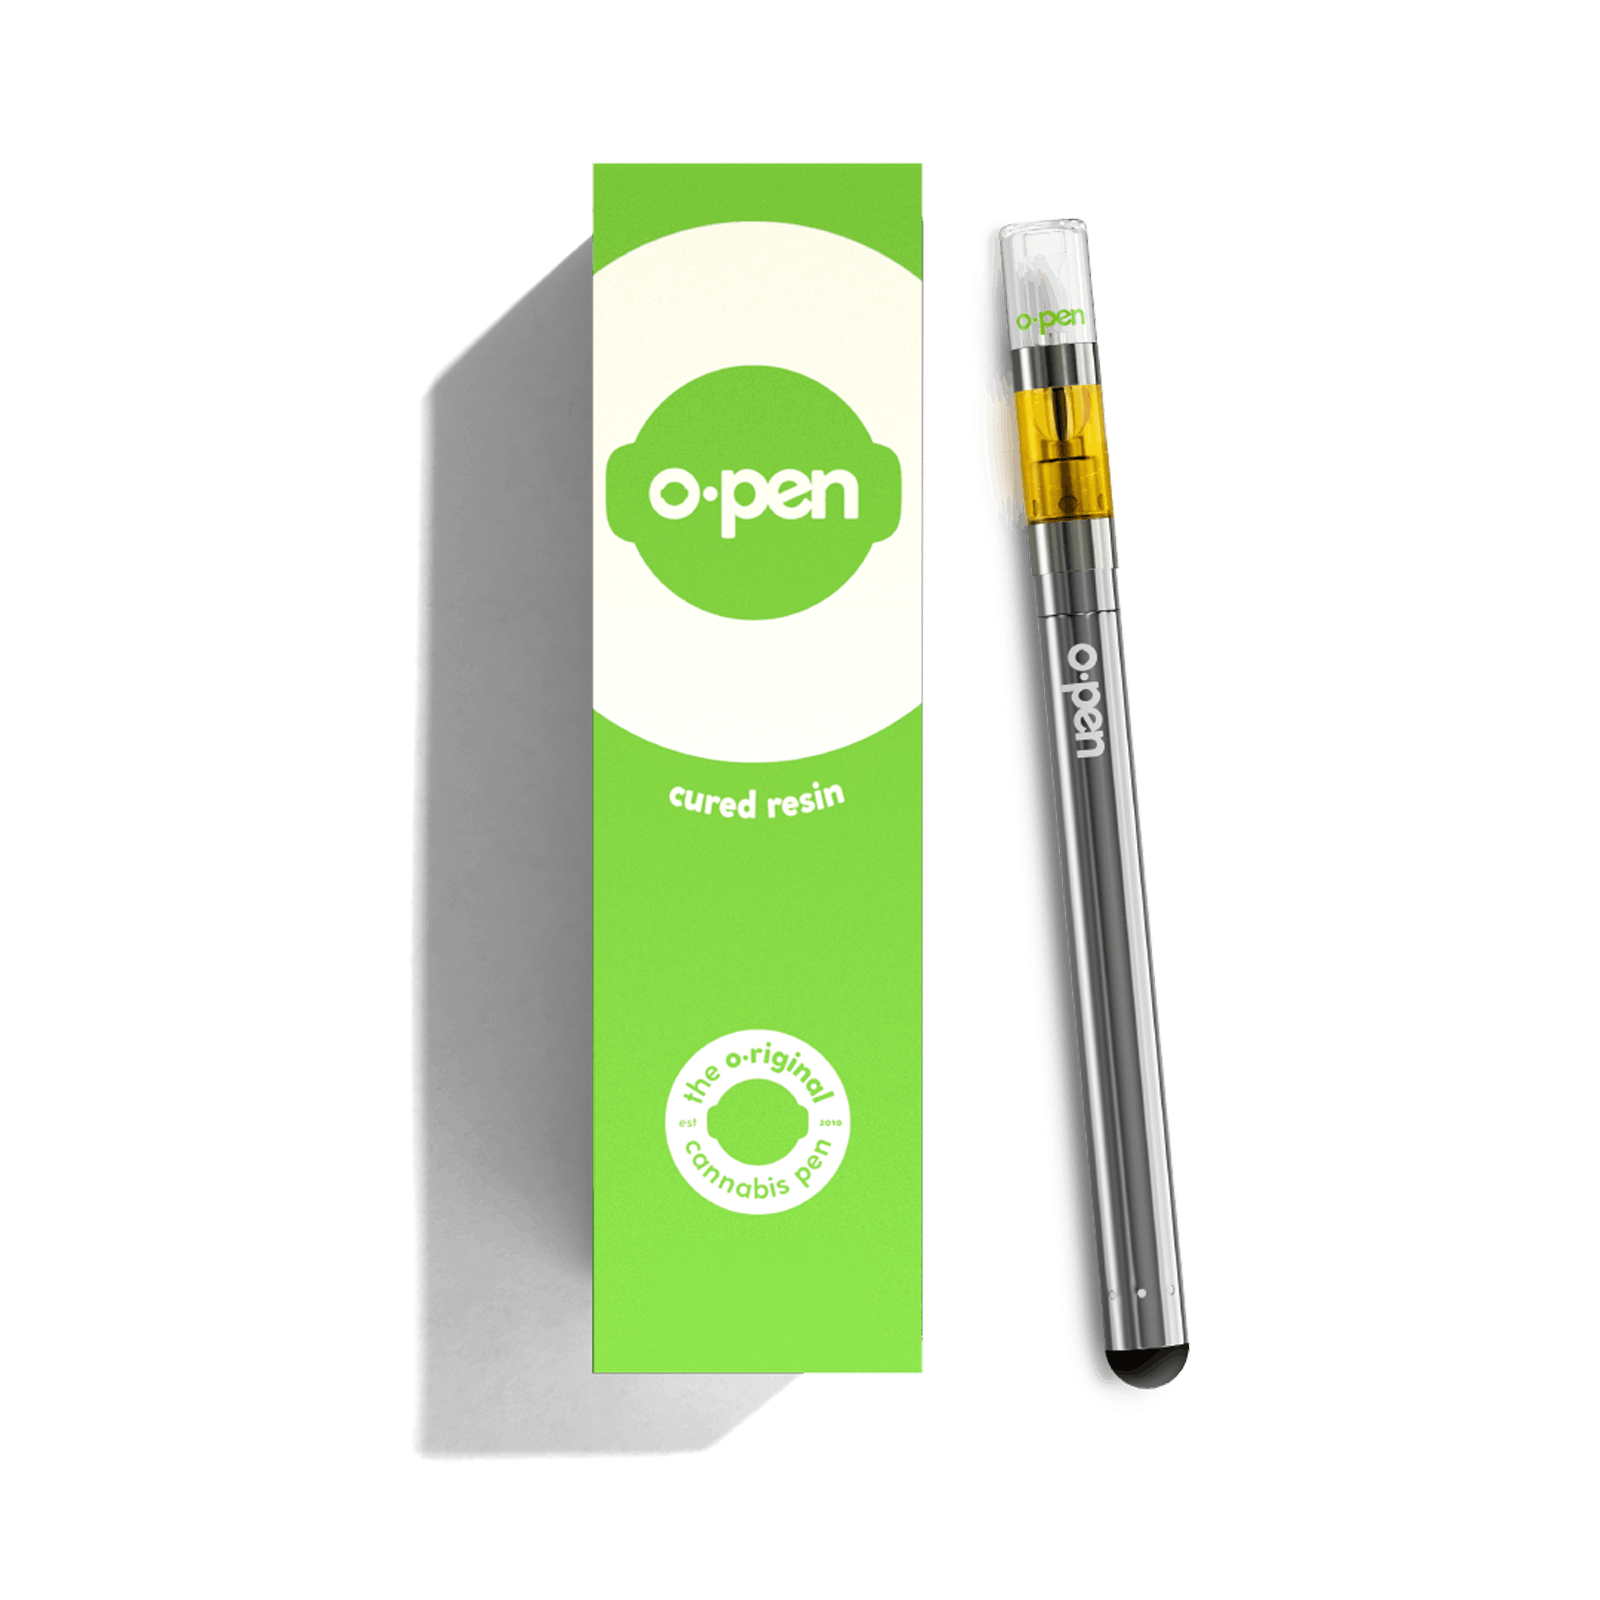 Black machined steel pen with hexagonal grip and small white logo at top.